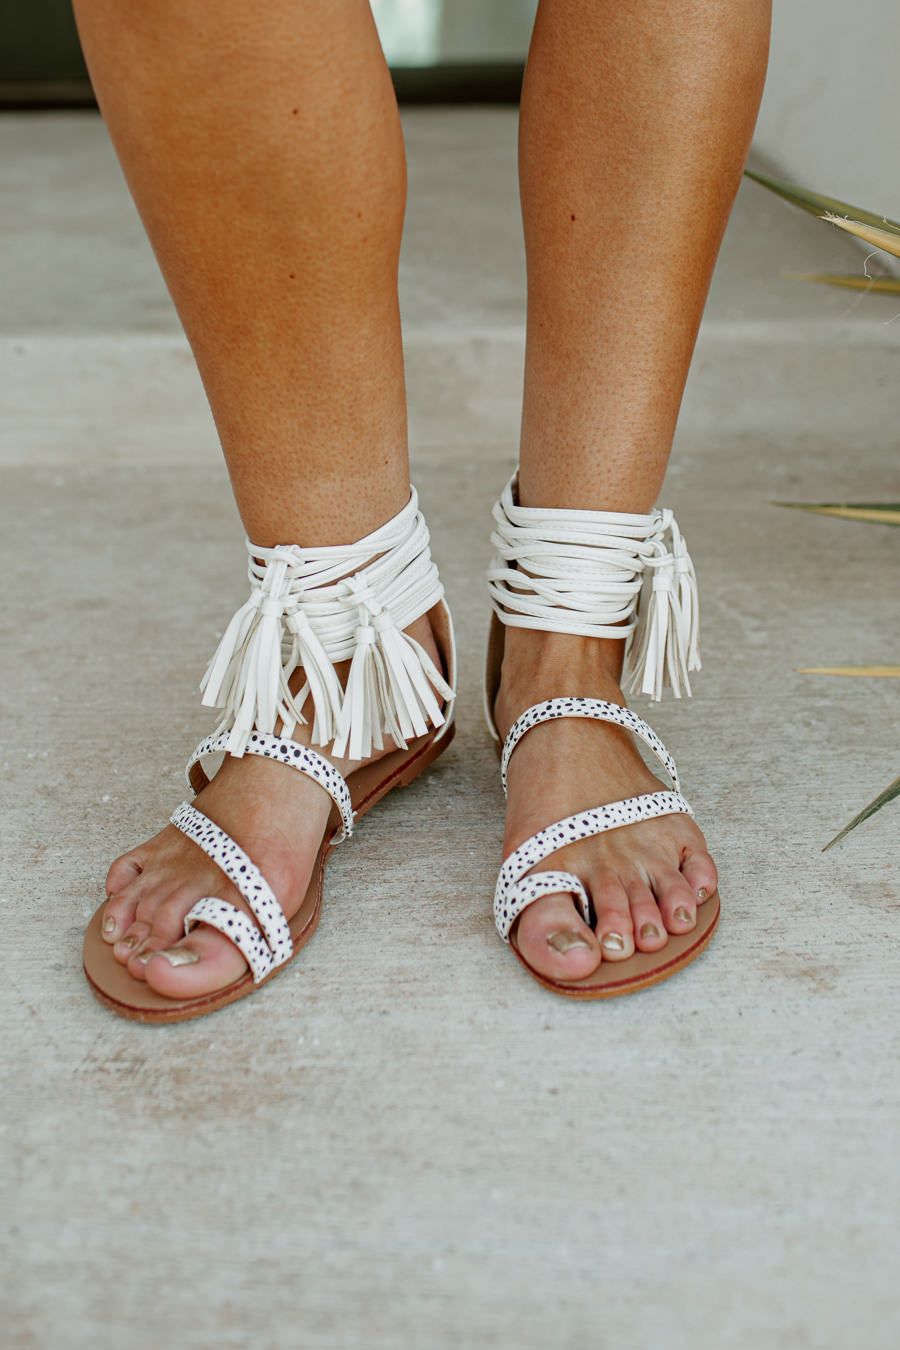 Chic Leather Tassel Sandals: The Must-Have Footwear Trend of the Season